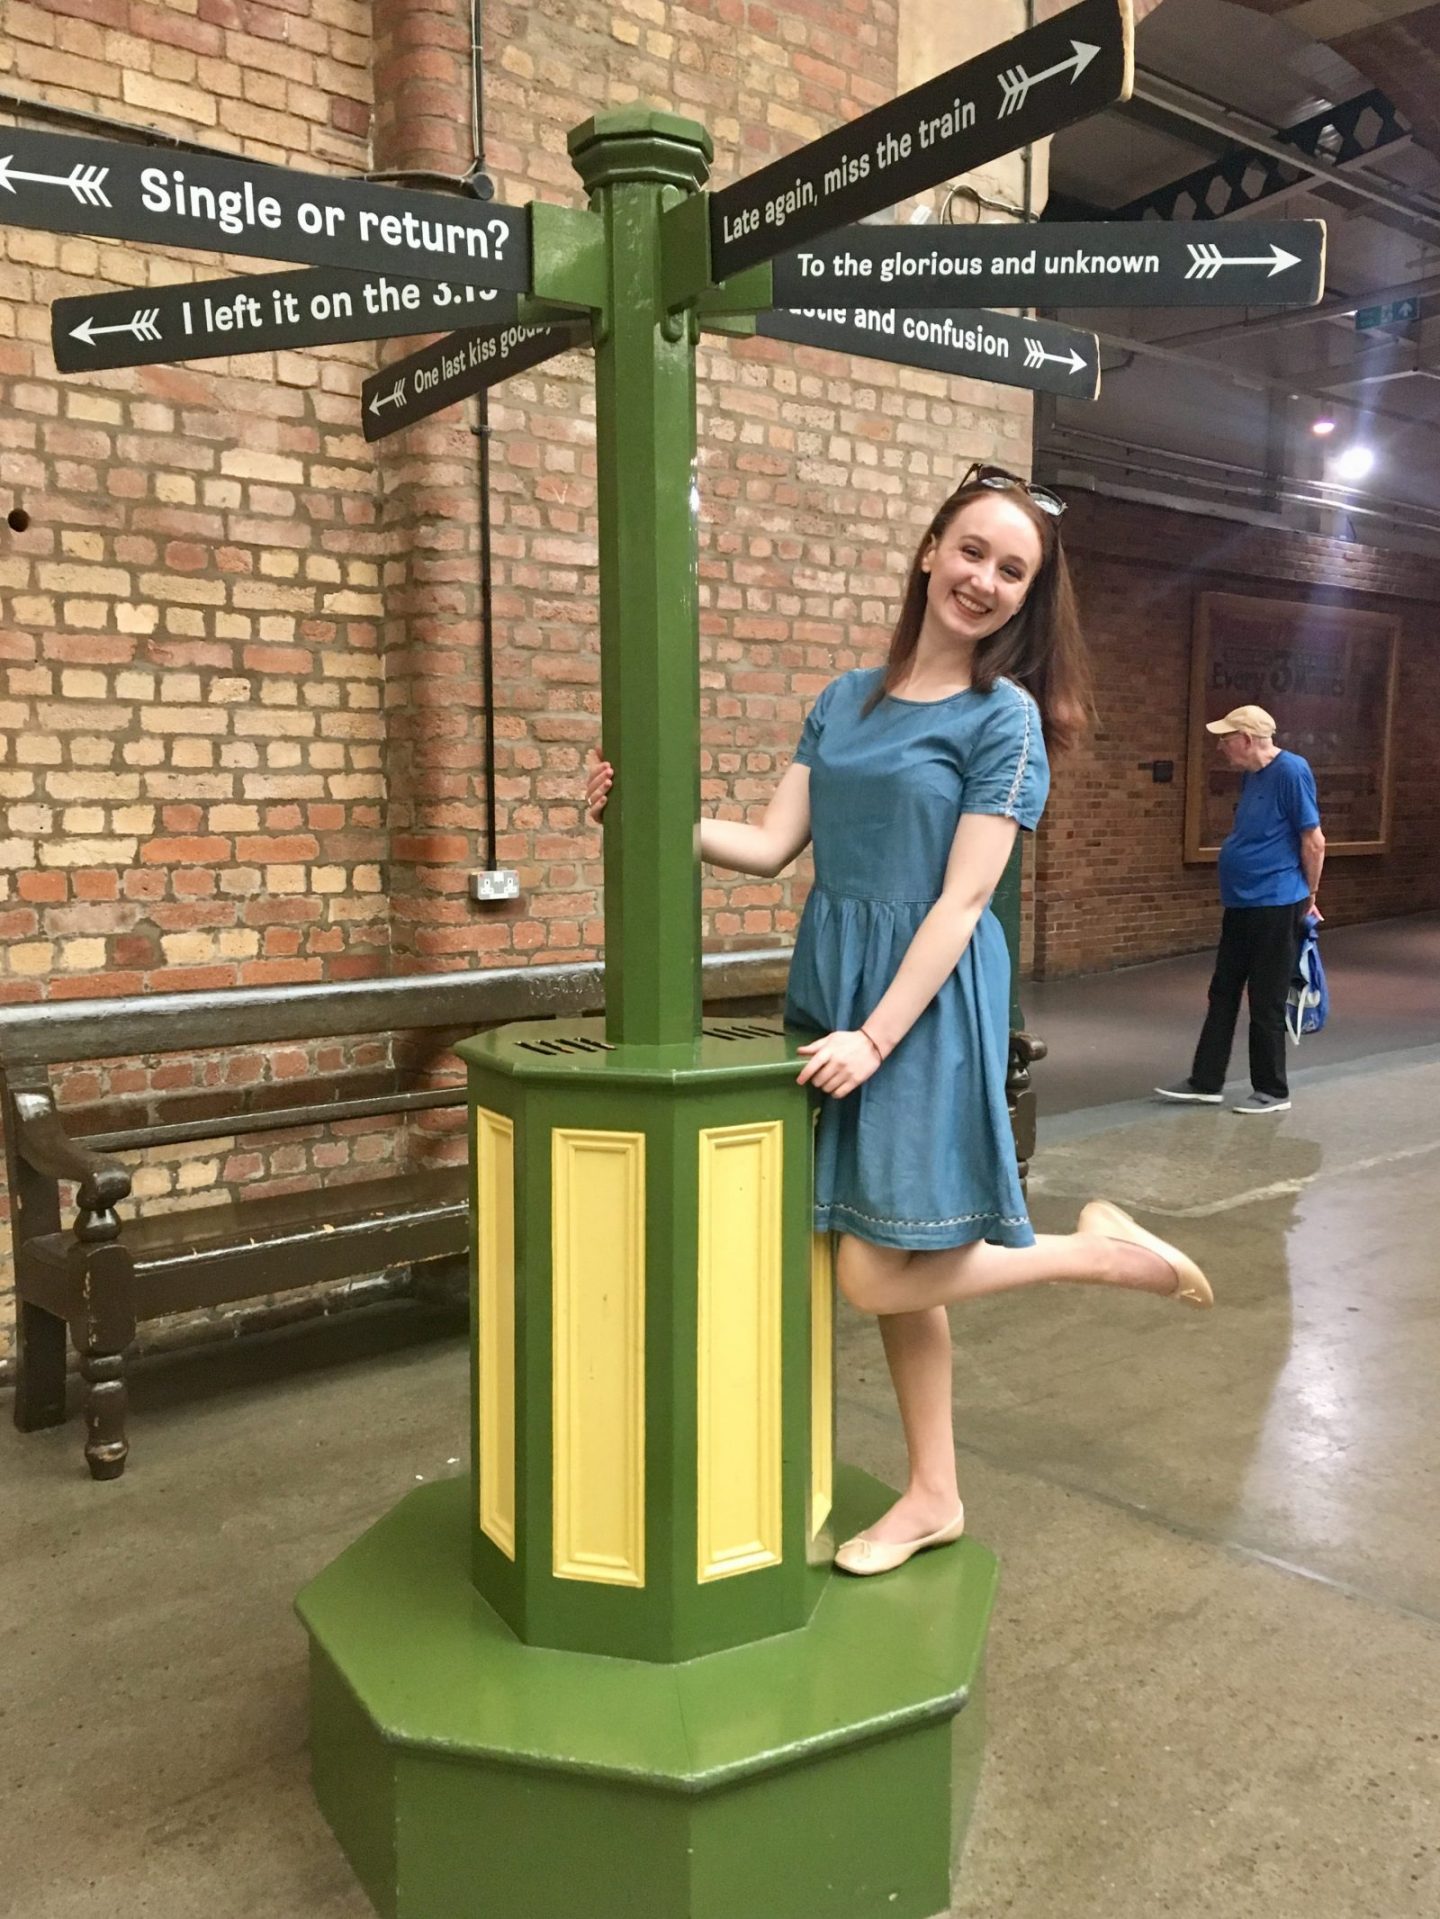 pippa shamelessly posing next to decorative signpost reading 'to the glorious and unknown', wearing a blue dress and smiling